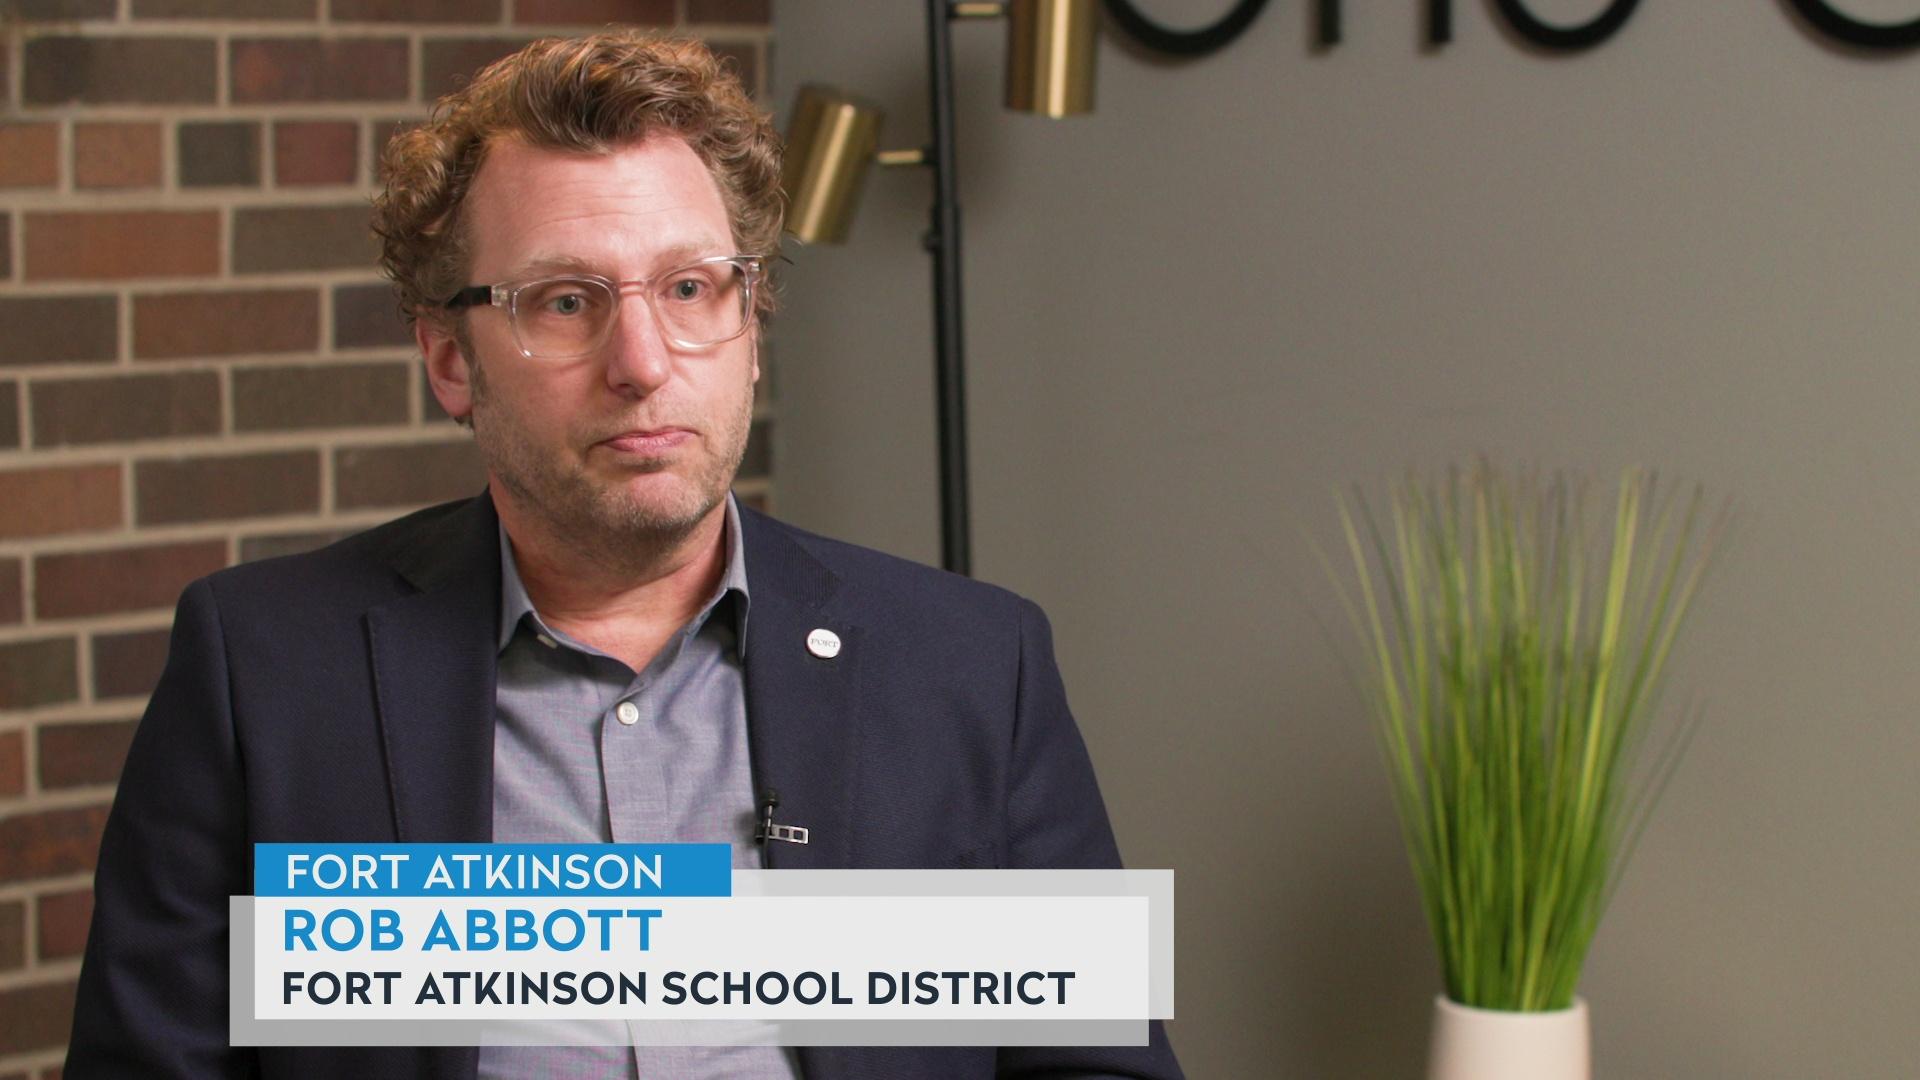 Rob Abbott on Fort Atkinson’s school district and defeasance